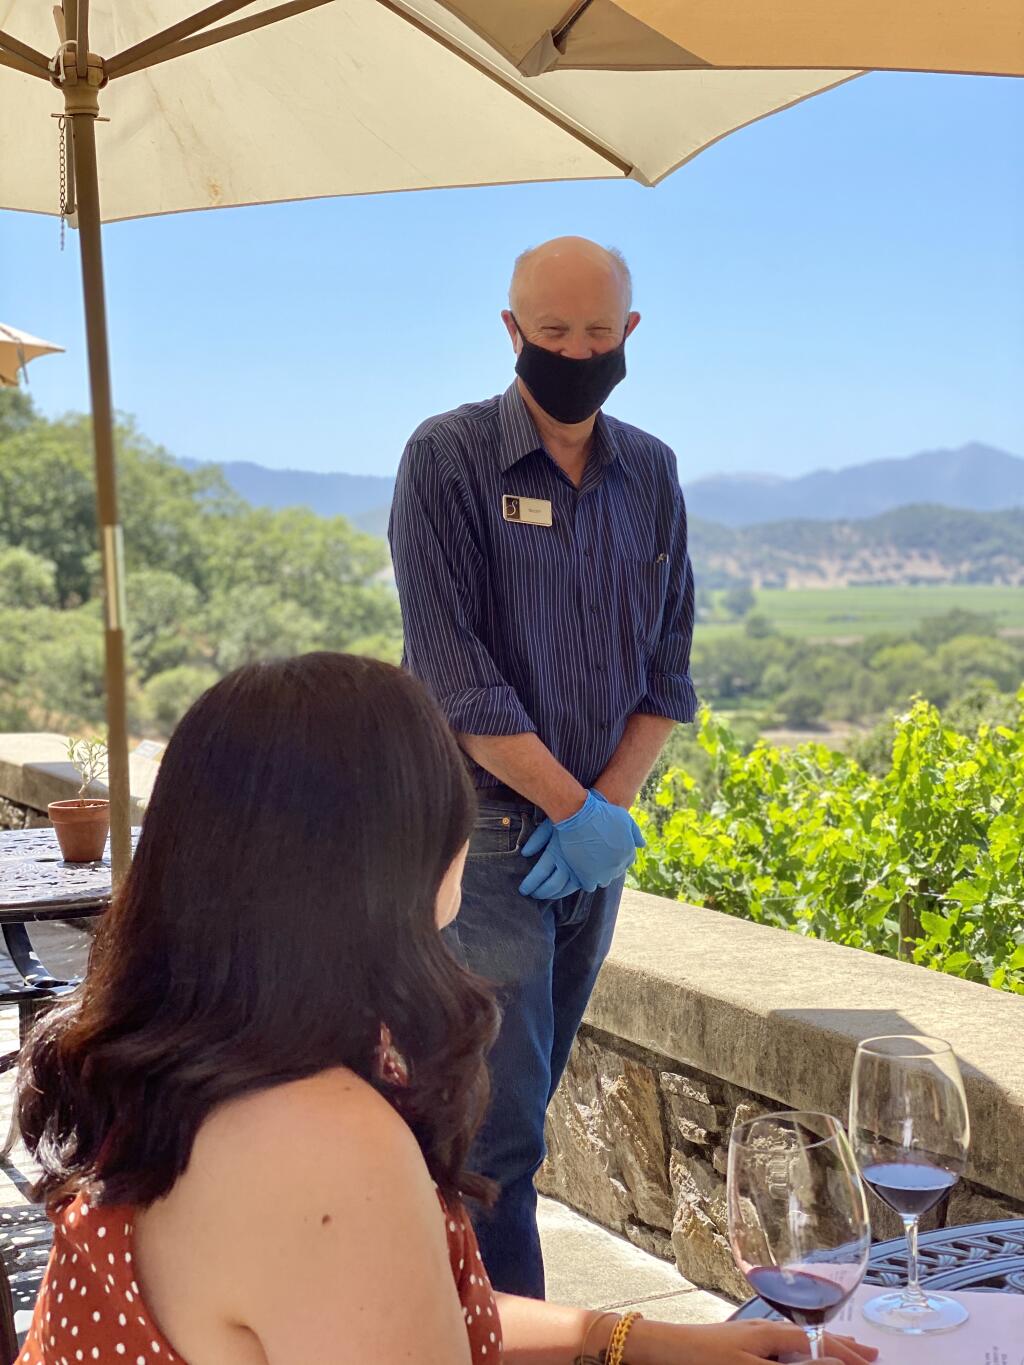 A Silverado Vineyards staff member serves a visitor July 2, 2020, on one of the outdoor terraces overlooking Napa Valley. (courtesy photo)